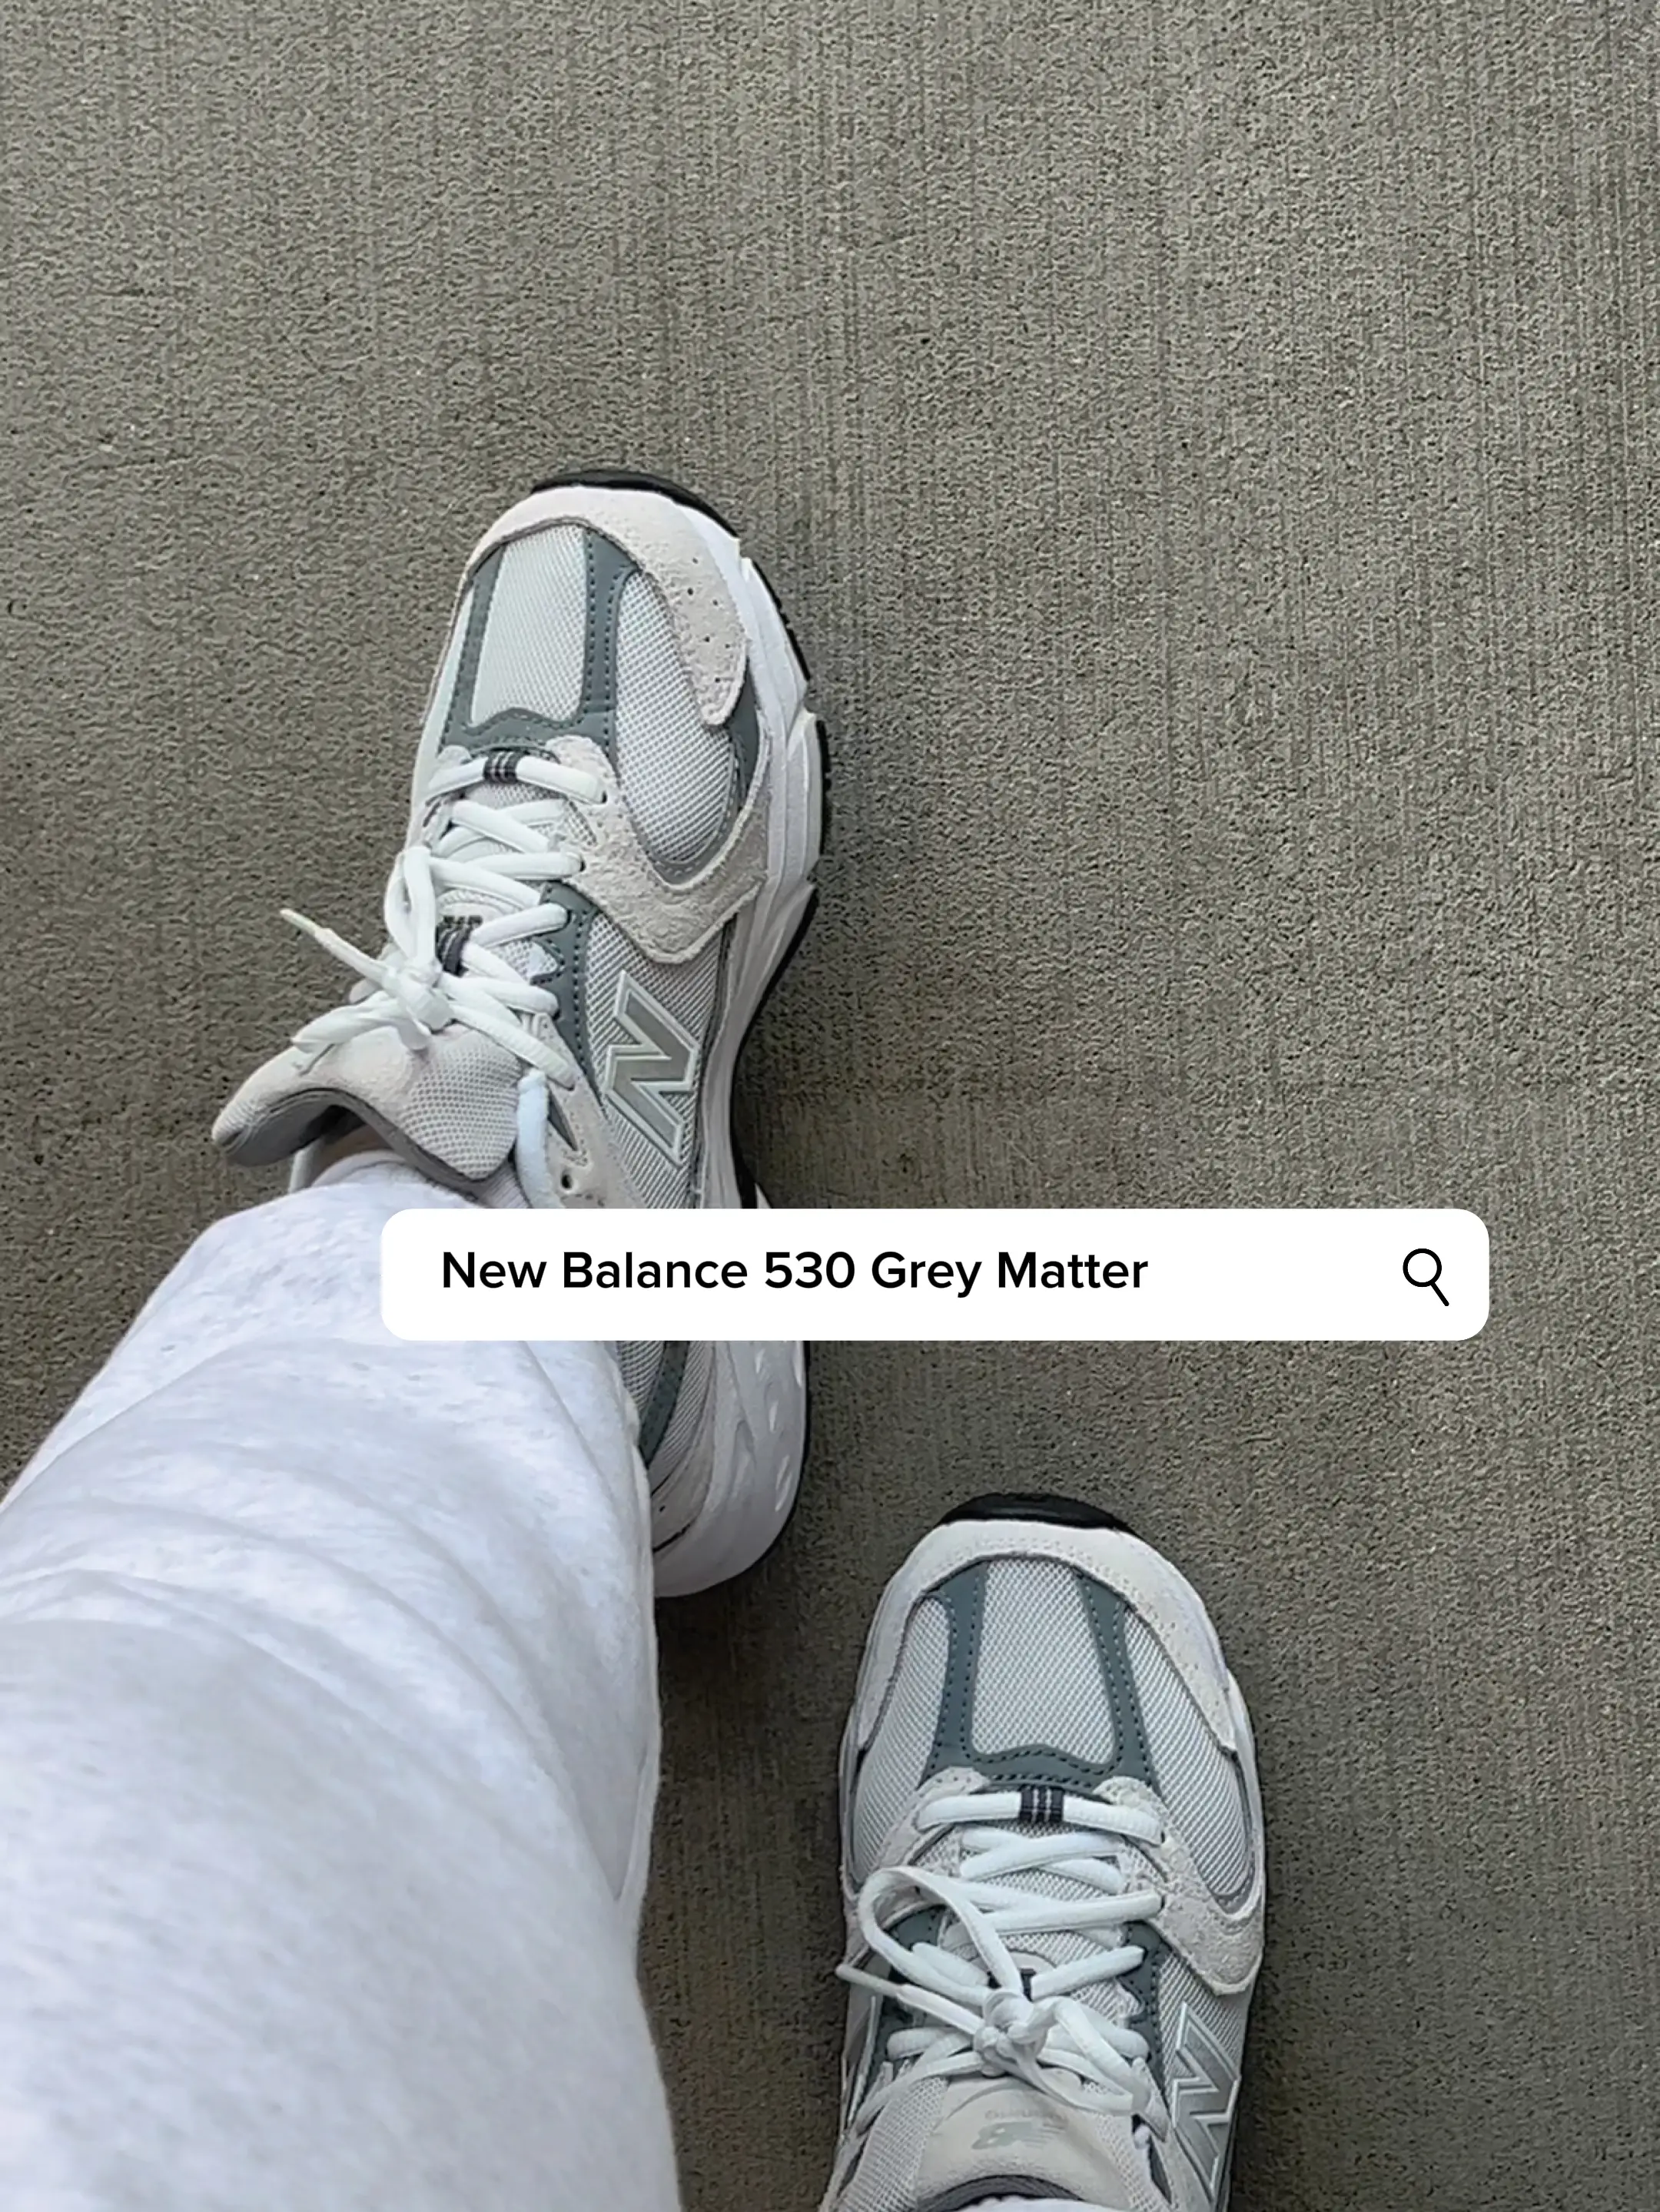 Ways to wear New Balance 530s, Gallery posted by Elbuckles